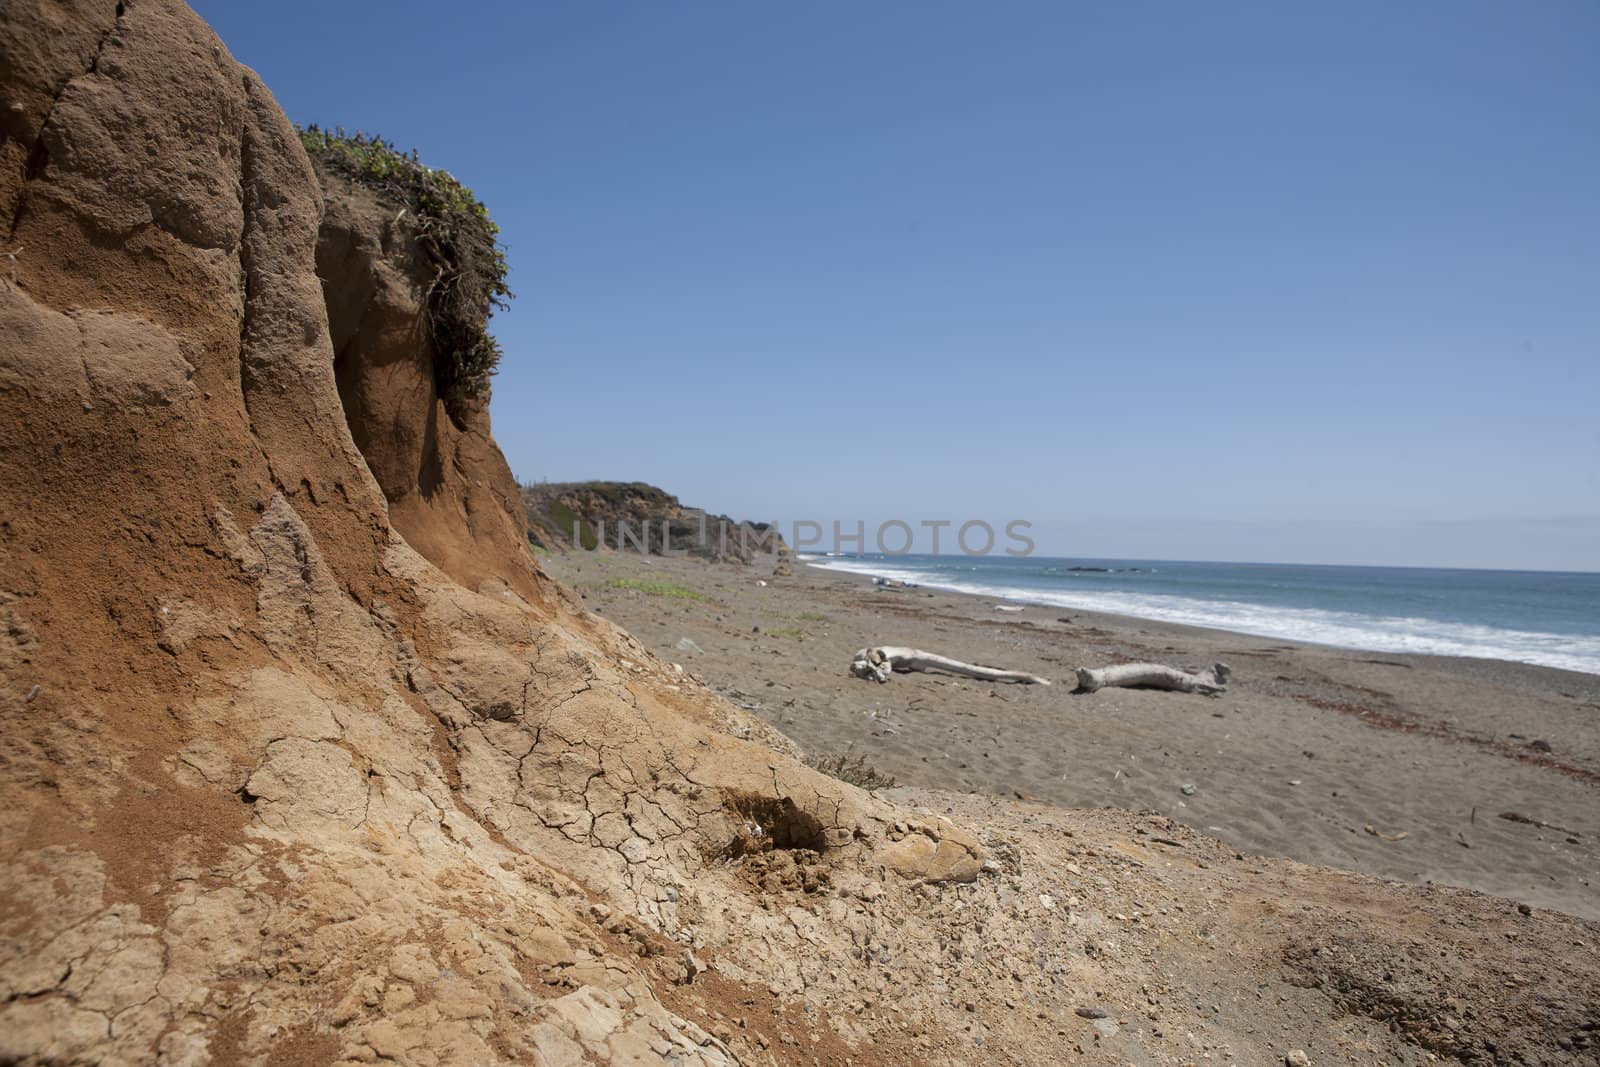 Dry mud and sandy beach off Highway 1 in California.